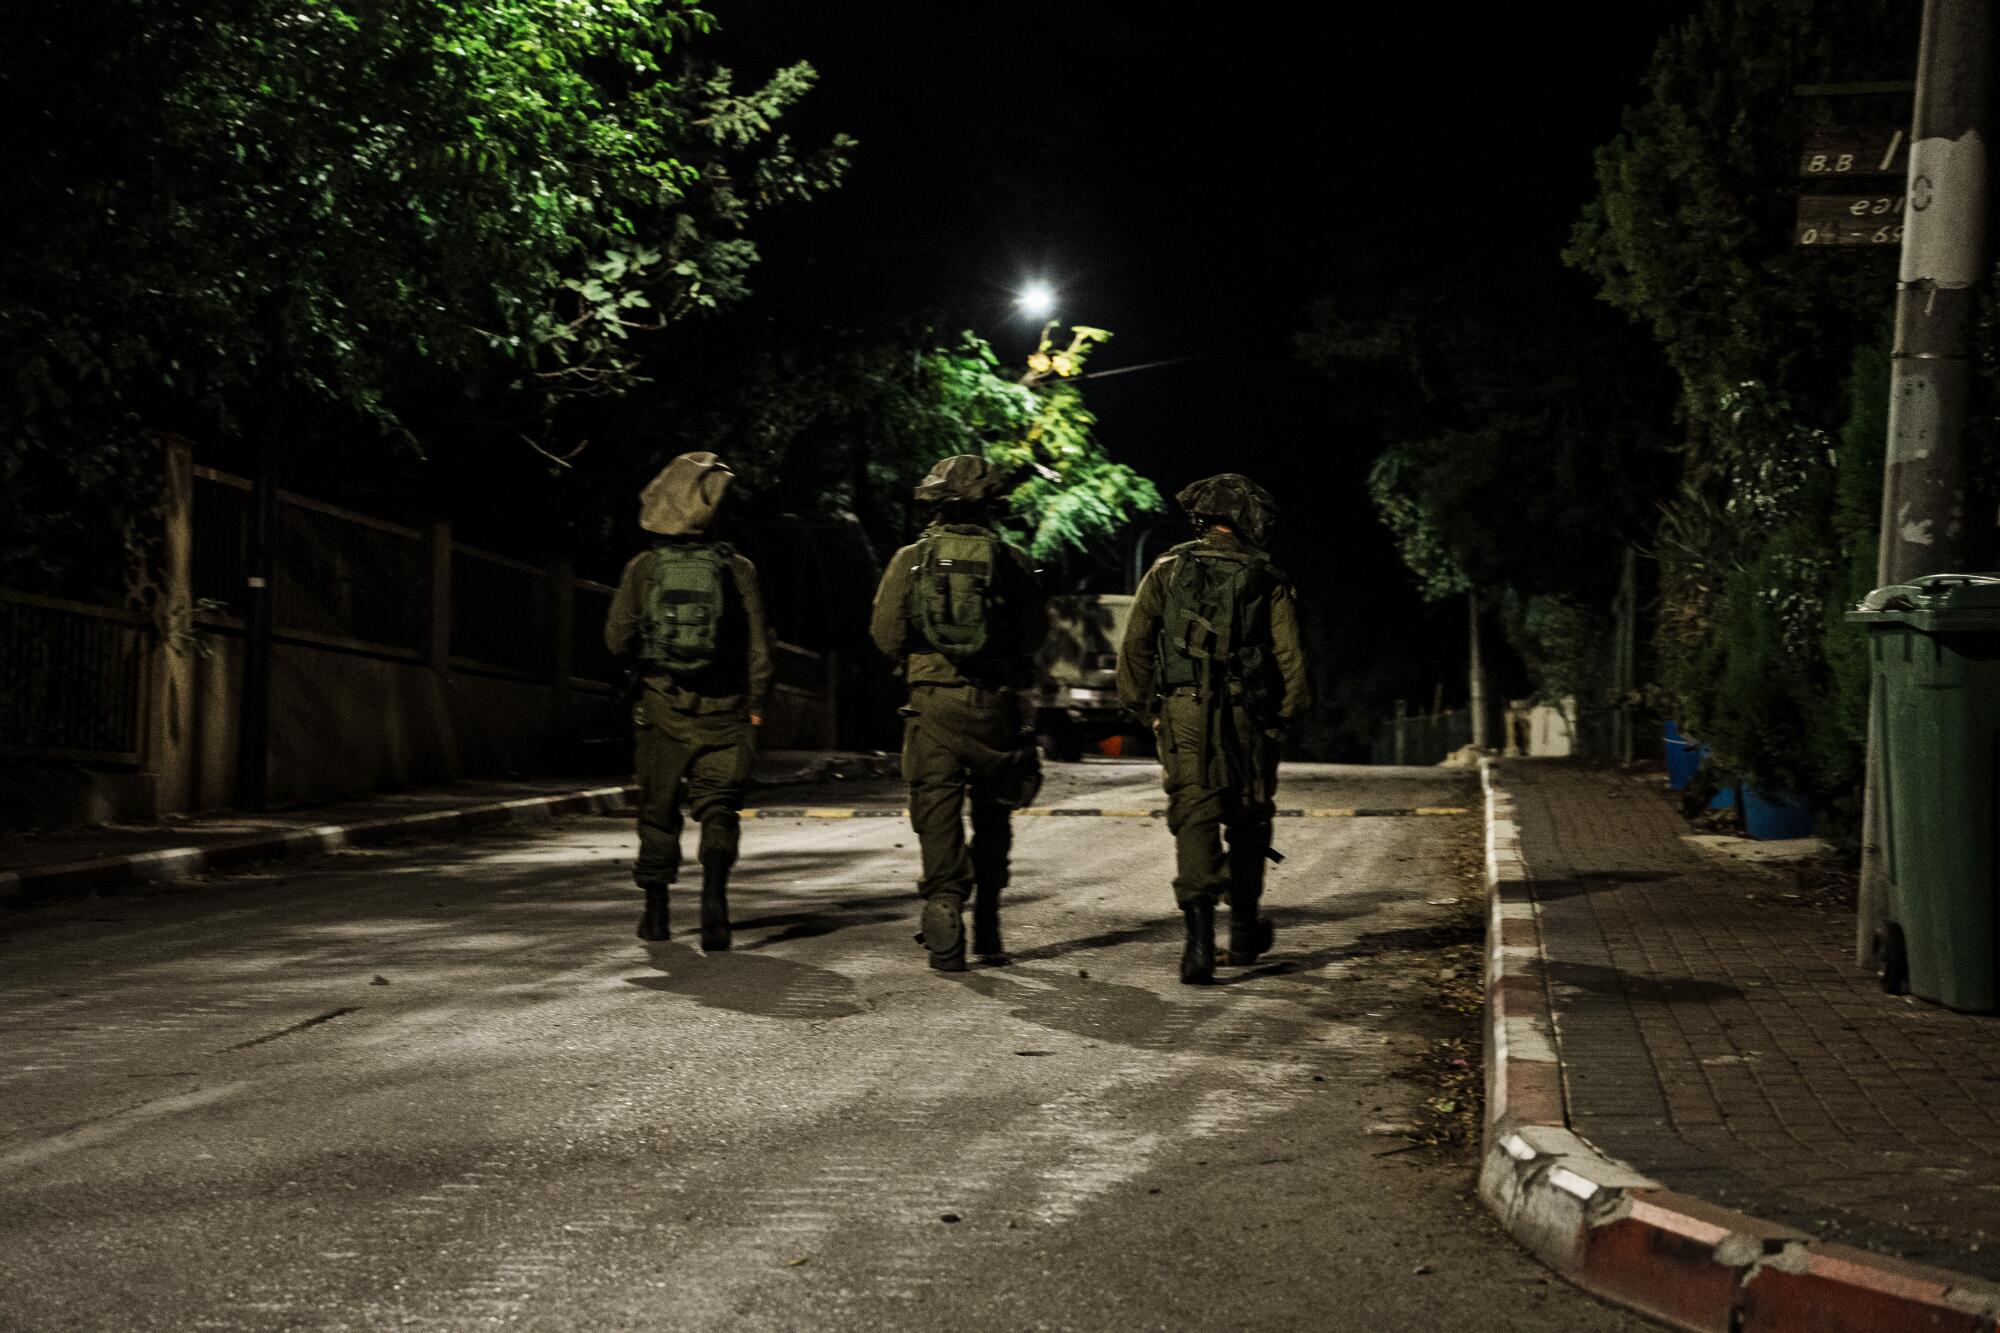 Three people in military uniform, seen from behind, walk on a darkened, empty street toward a light in the distance